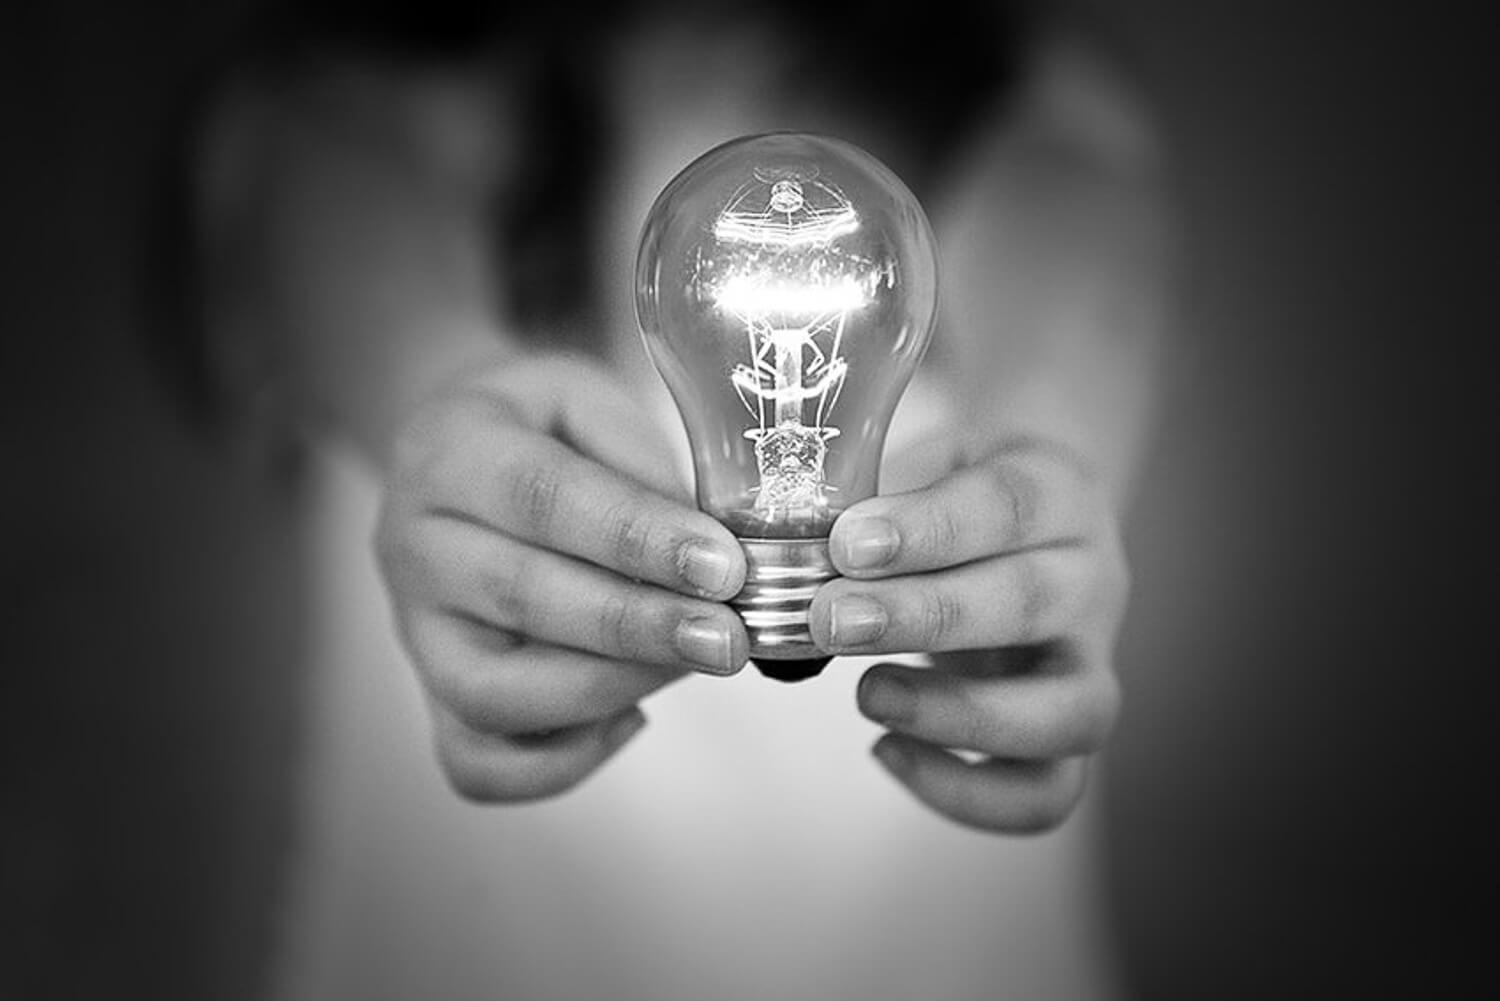 Black and white photo of a lighted bulb held in a child's hands